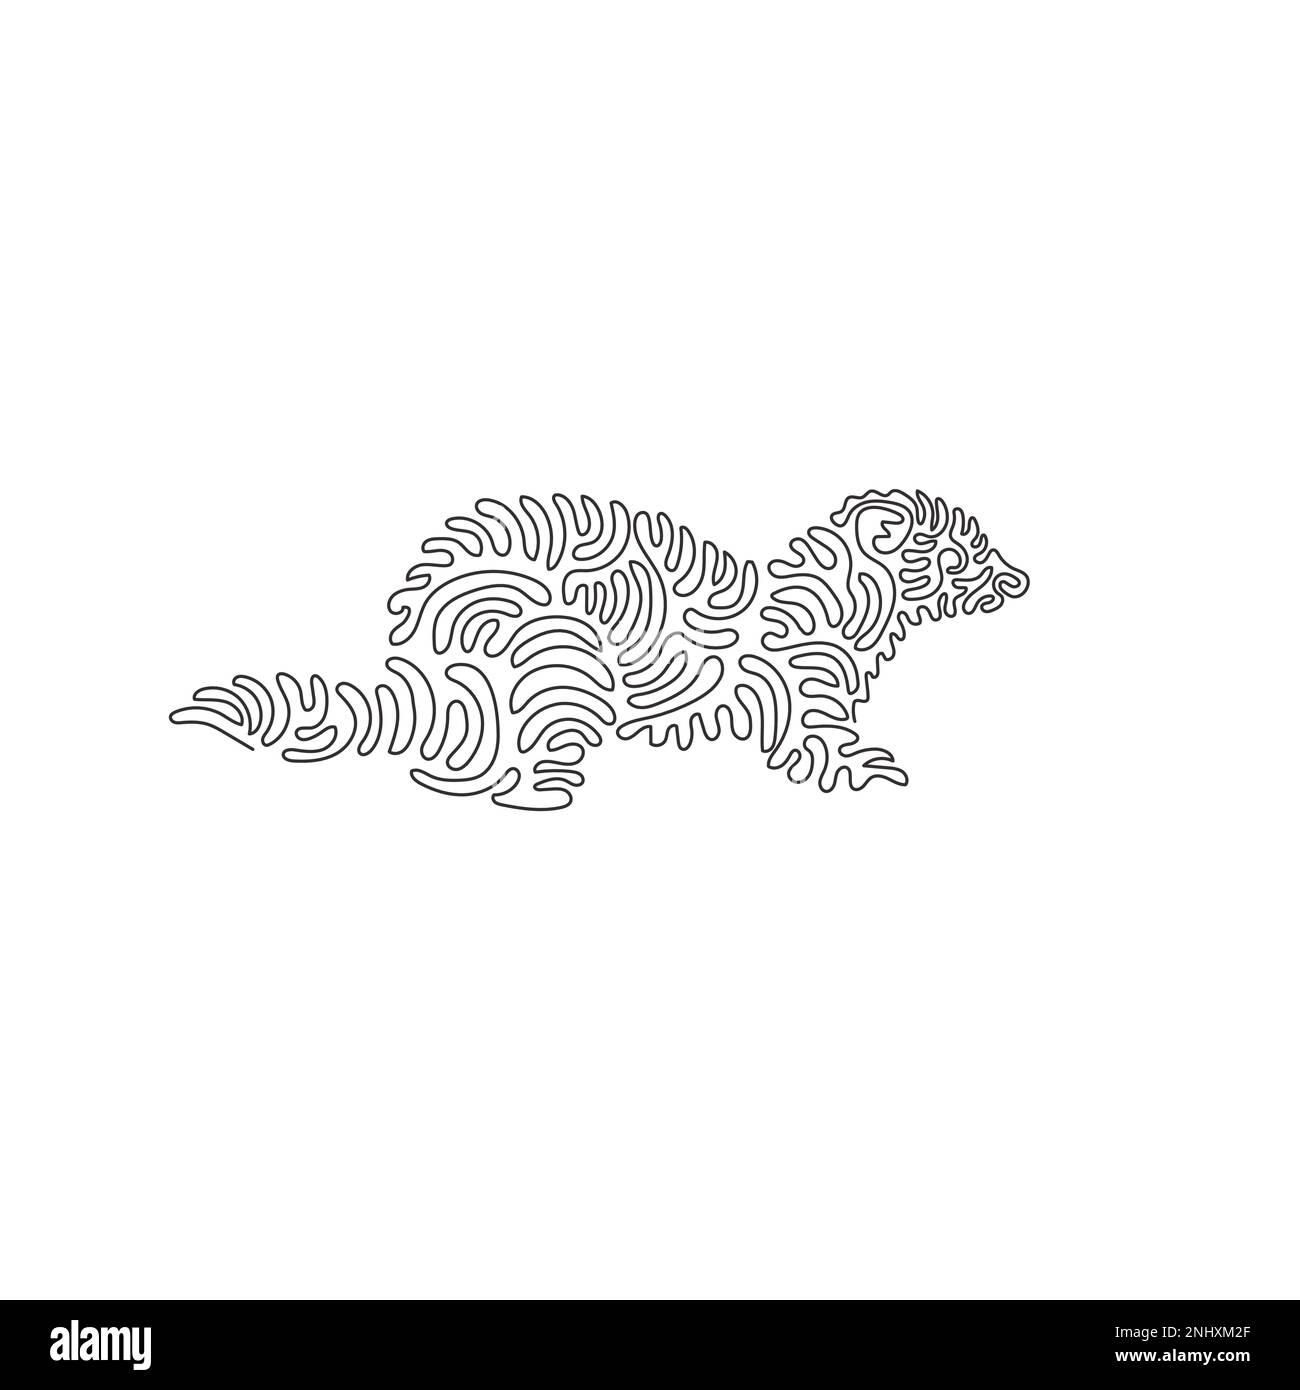 Single swirl continuous line drawing of cute ferret abstract art. Continuous line drawing graphic design vector illustration style of cone-shaped nose Stock Vector